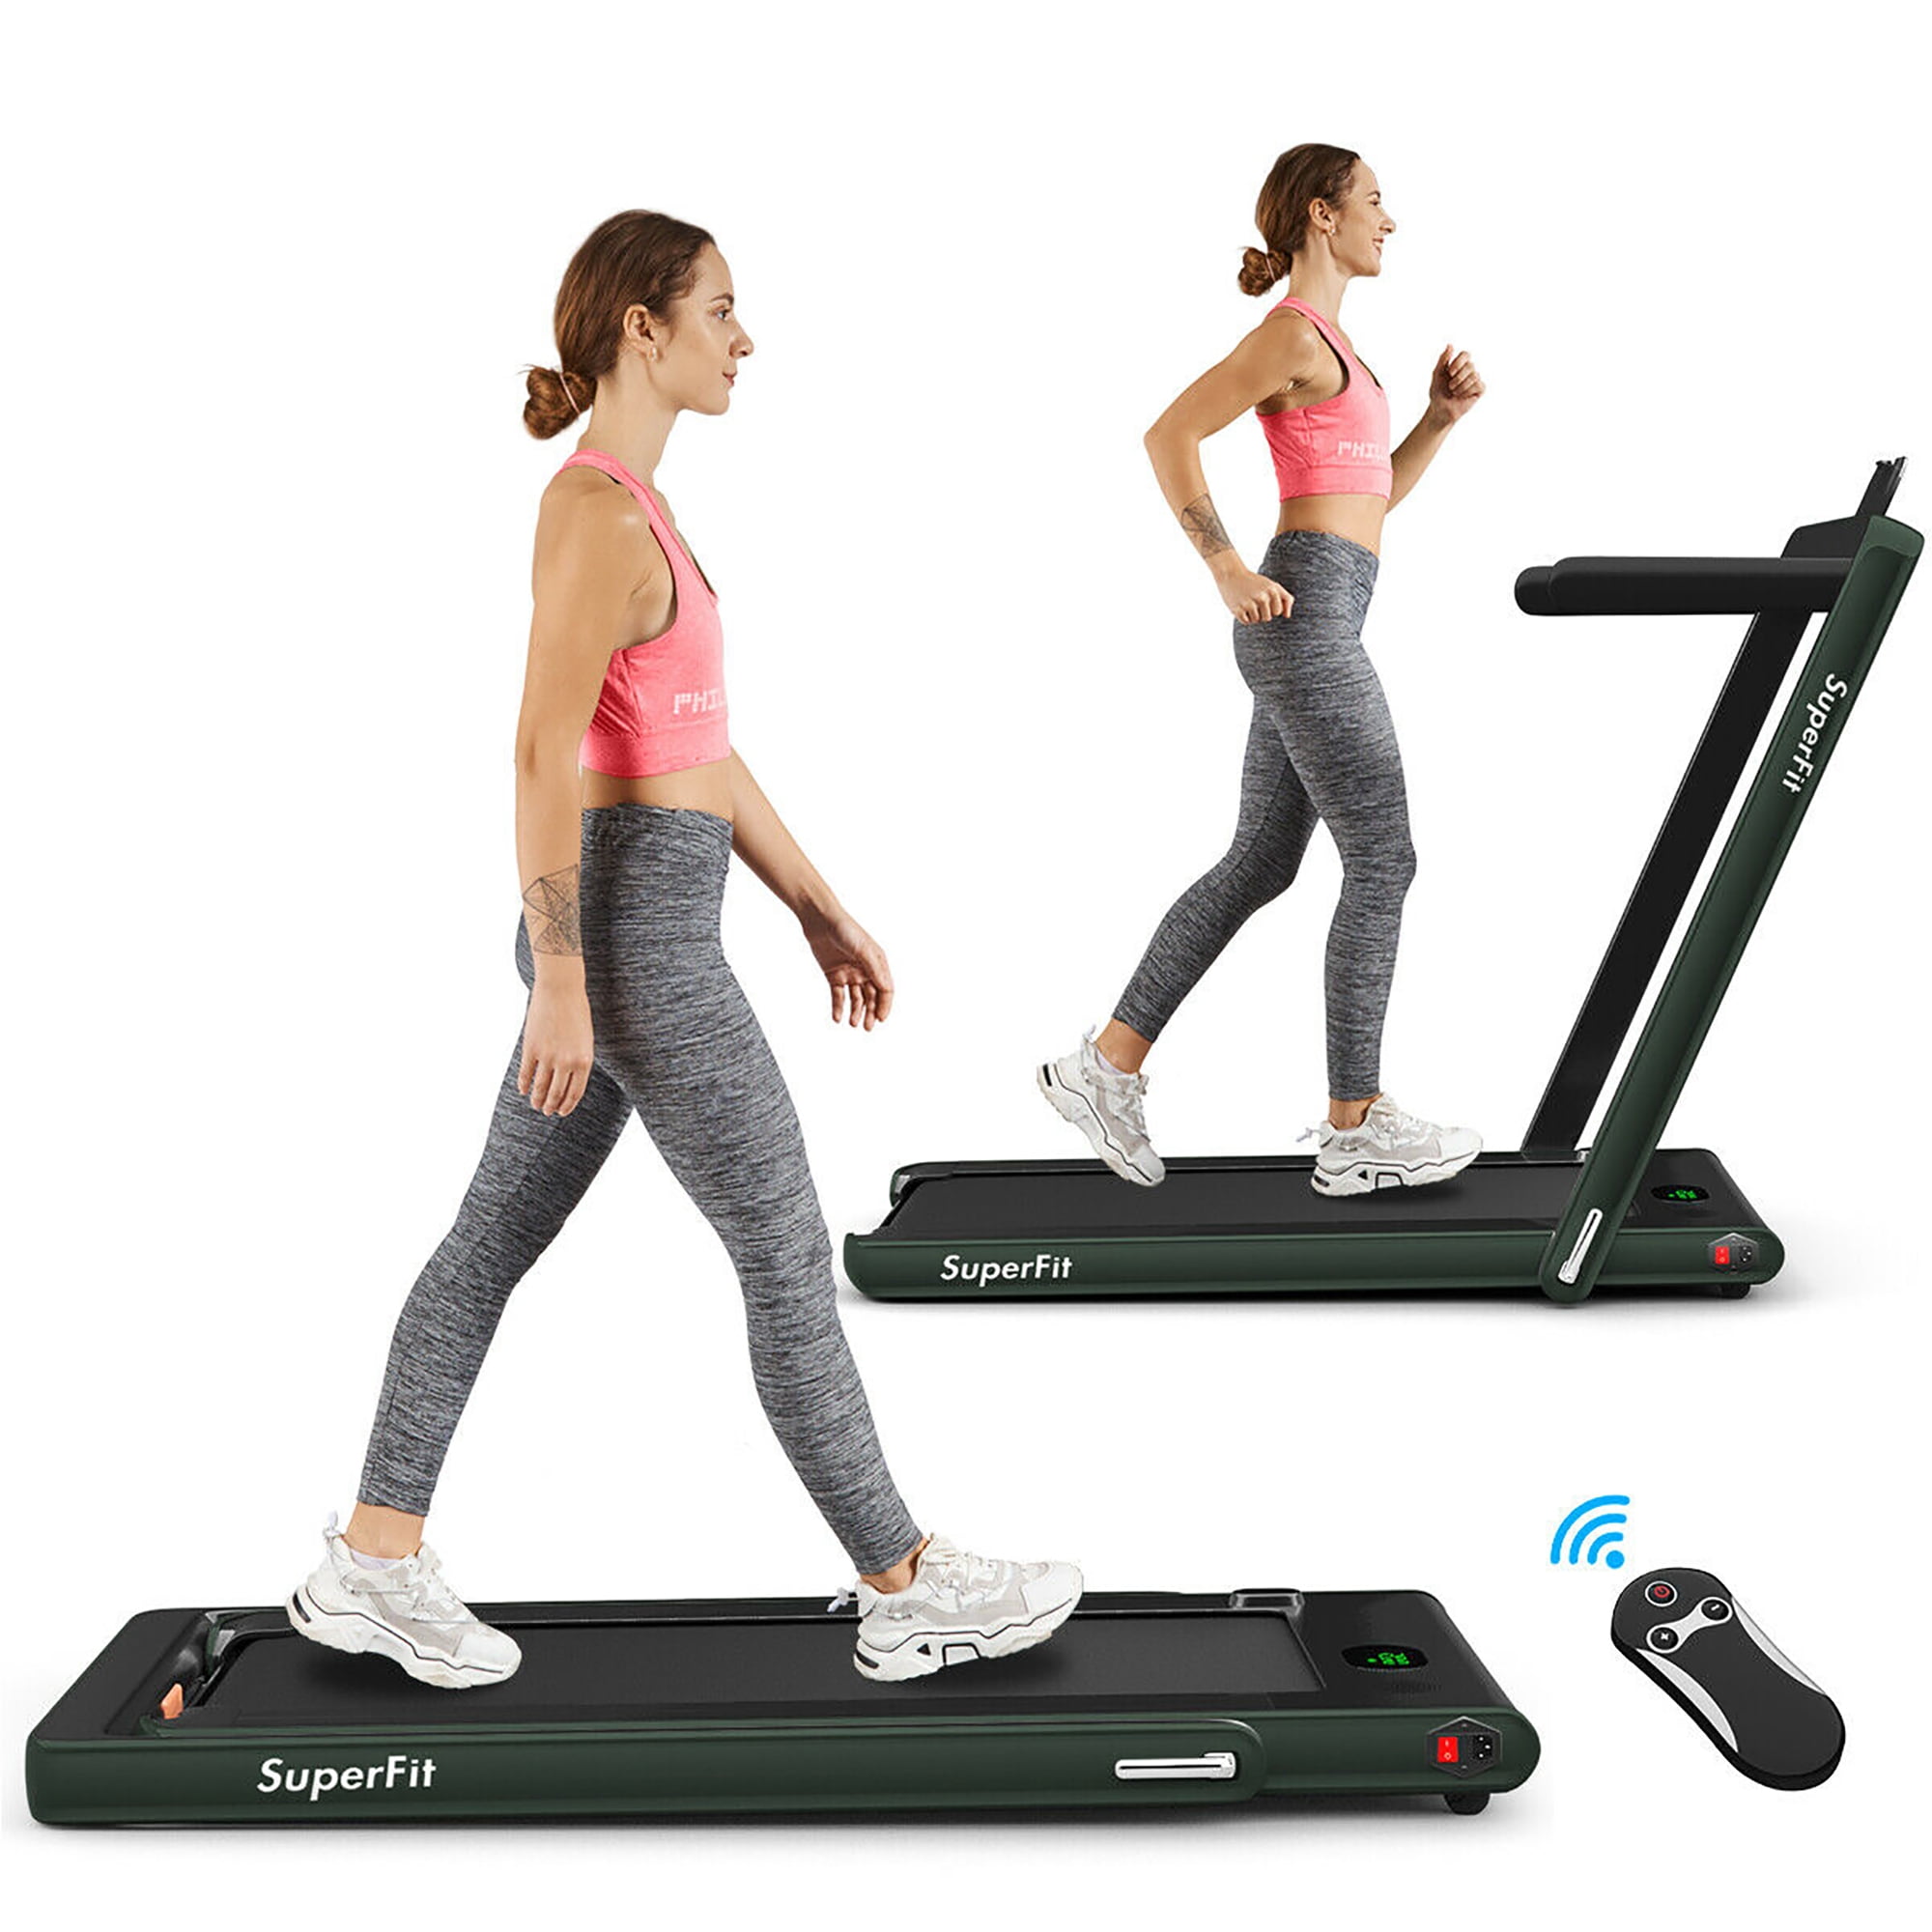 Superfit 2.25HP 2 in 1 Folding Treadmill W/Bluetooth Speaker Remote Control Home Gym SilverBlueRed